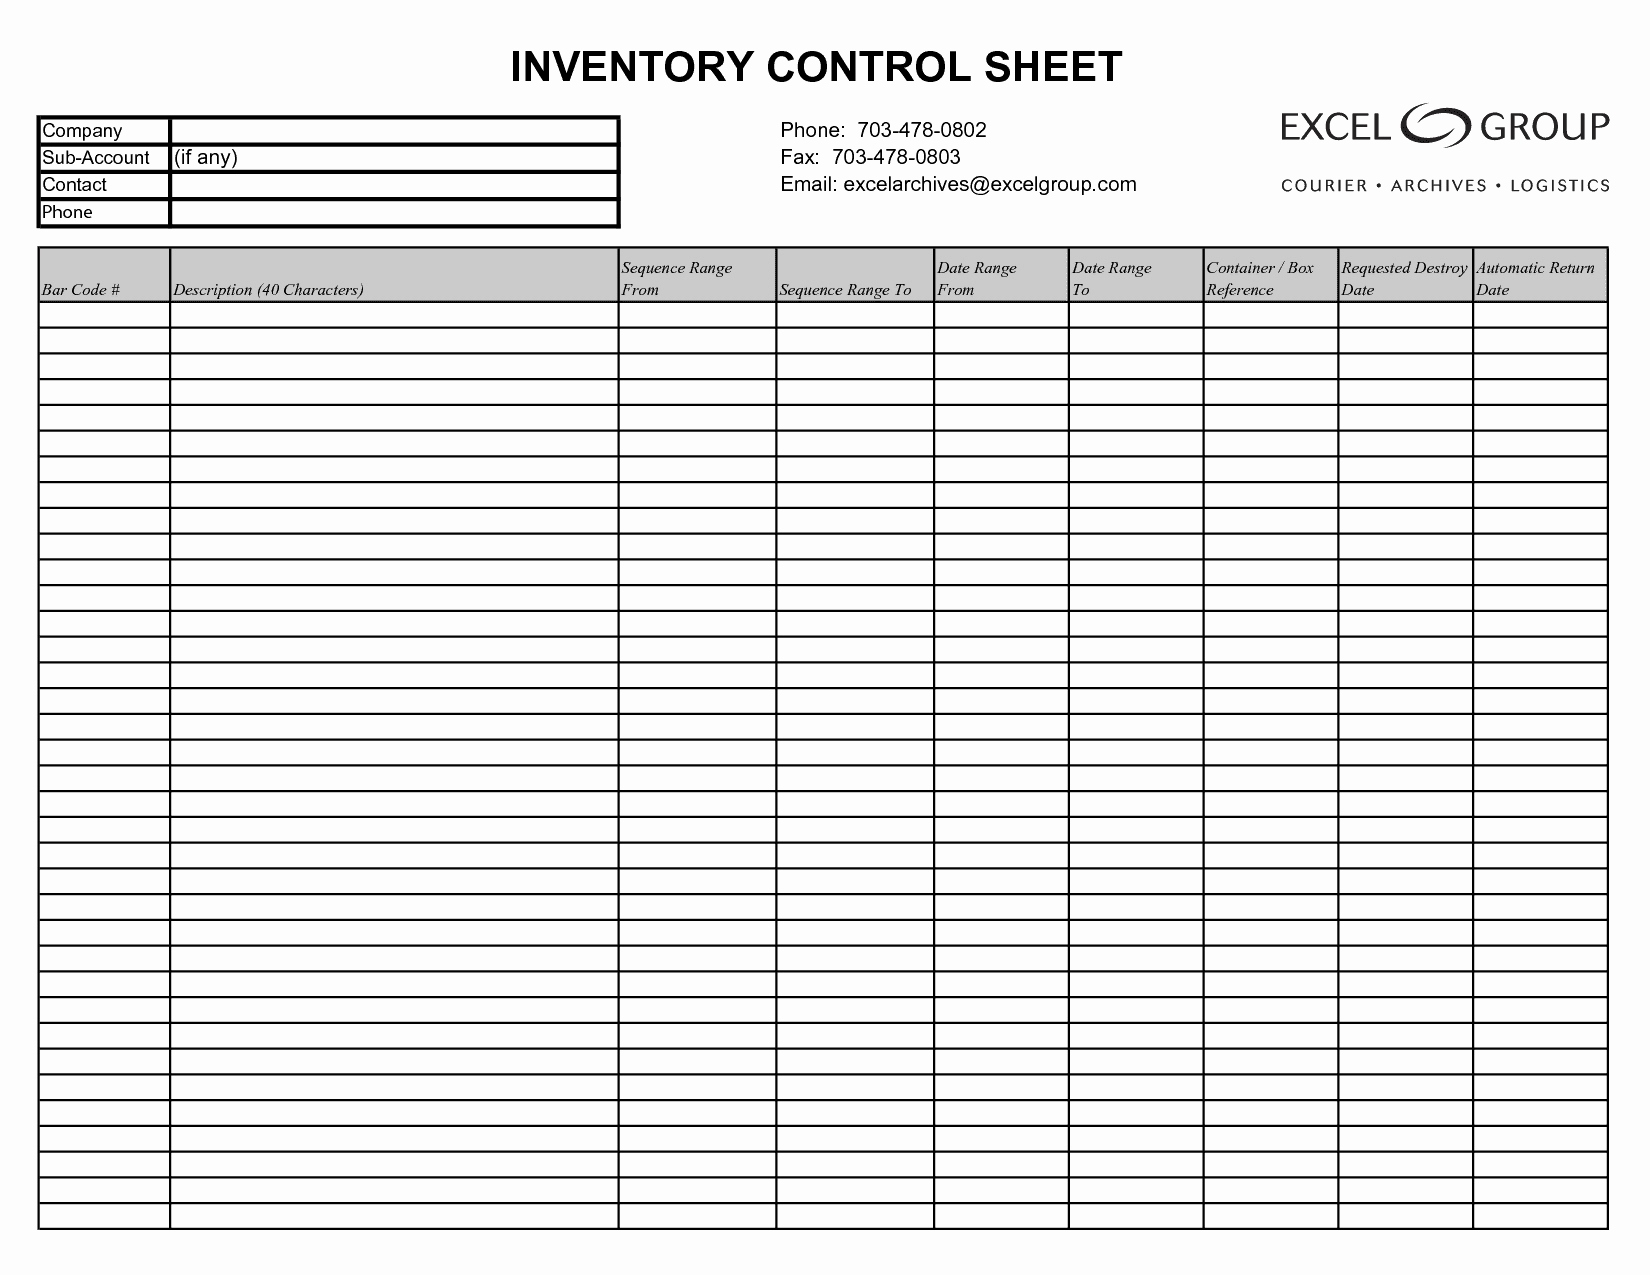 50 Lovely Inventory Management In Excel Free Download - Documents Throughout Inventory Management Template Free Download